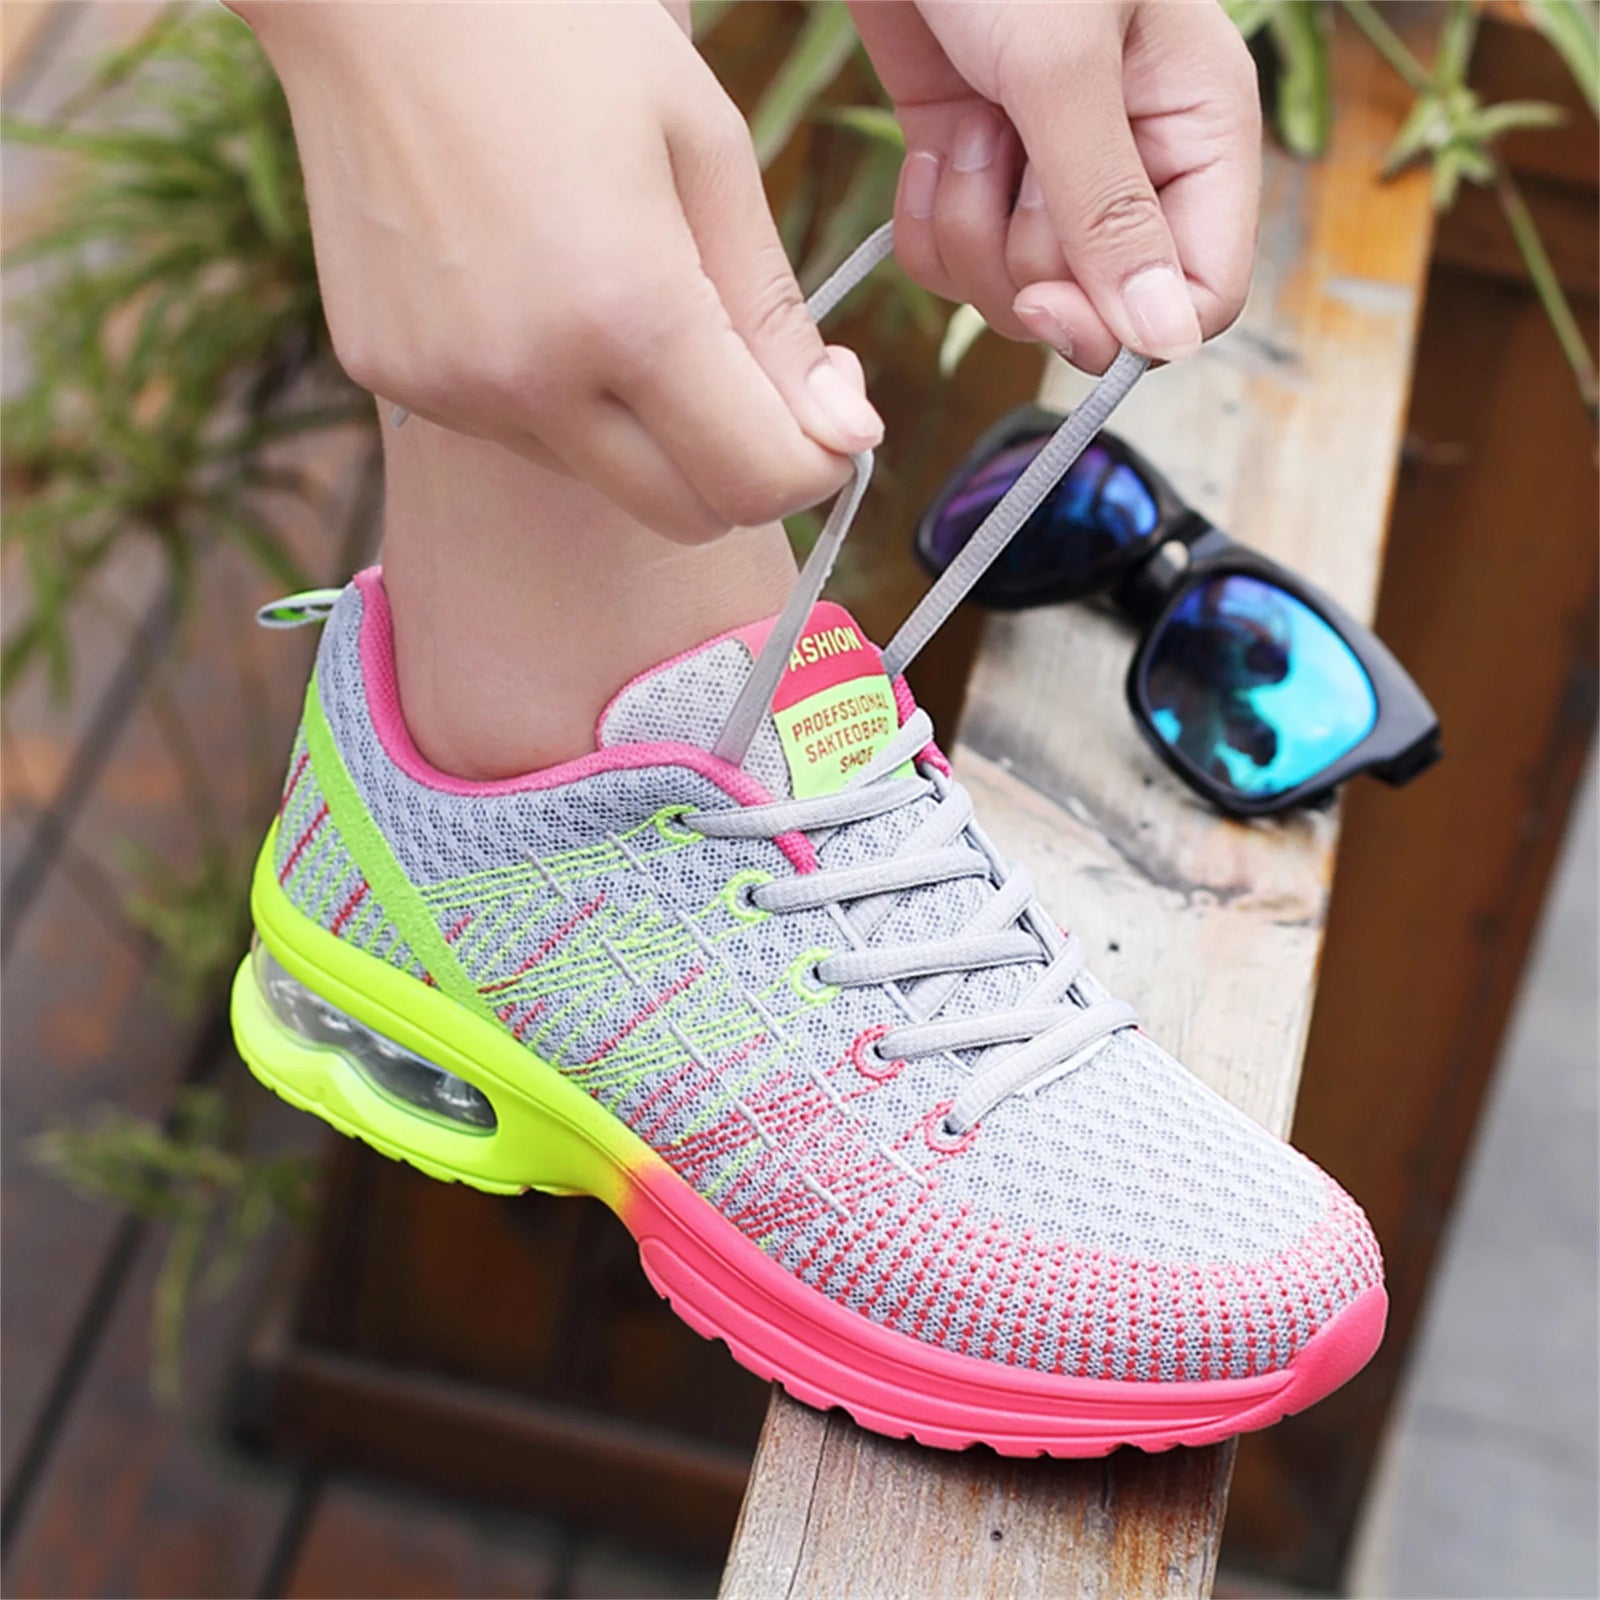 Sneaker for Women Breathable Athletic Air Cushion Running Shoes Lightweight Sport Shoes